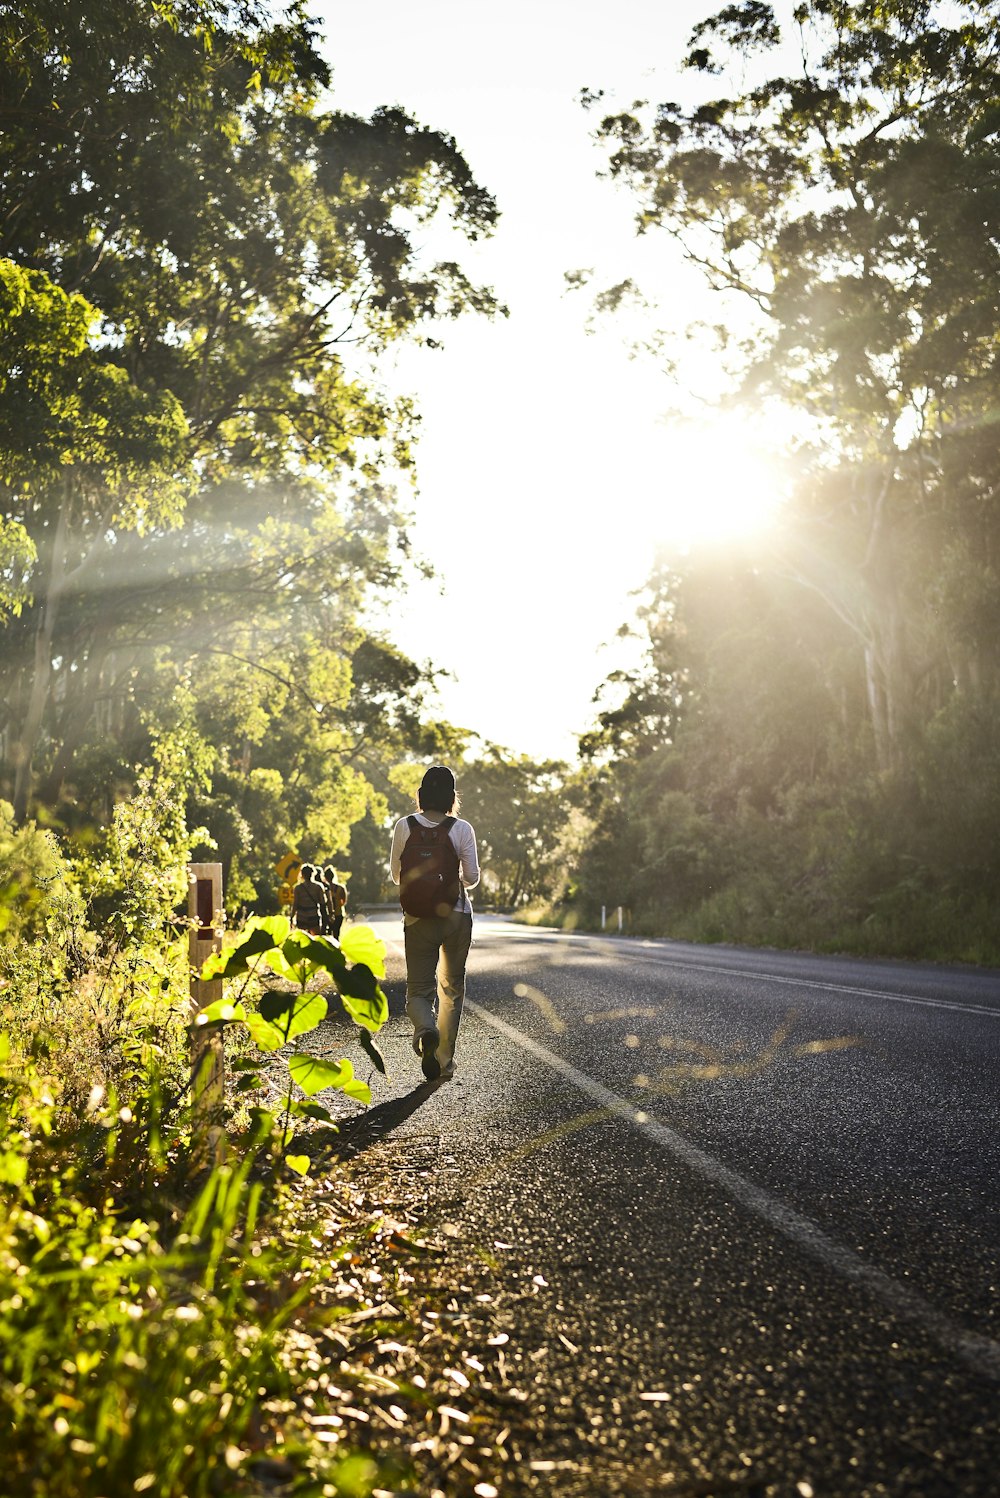 person carrying backpack walking in road beside trees